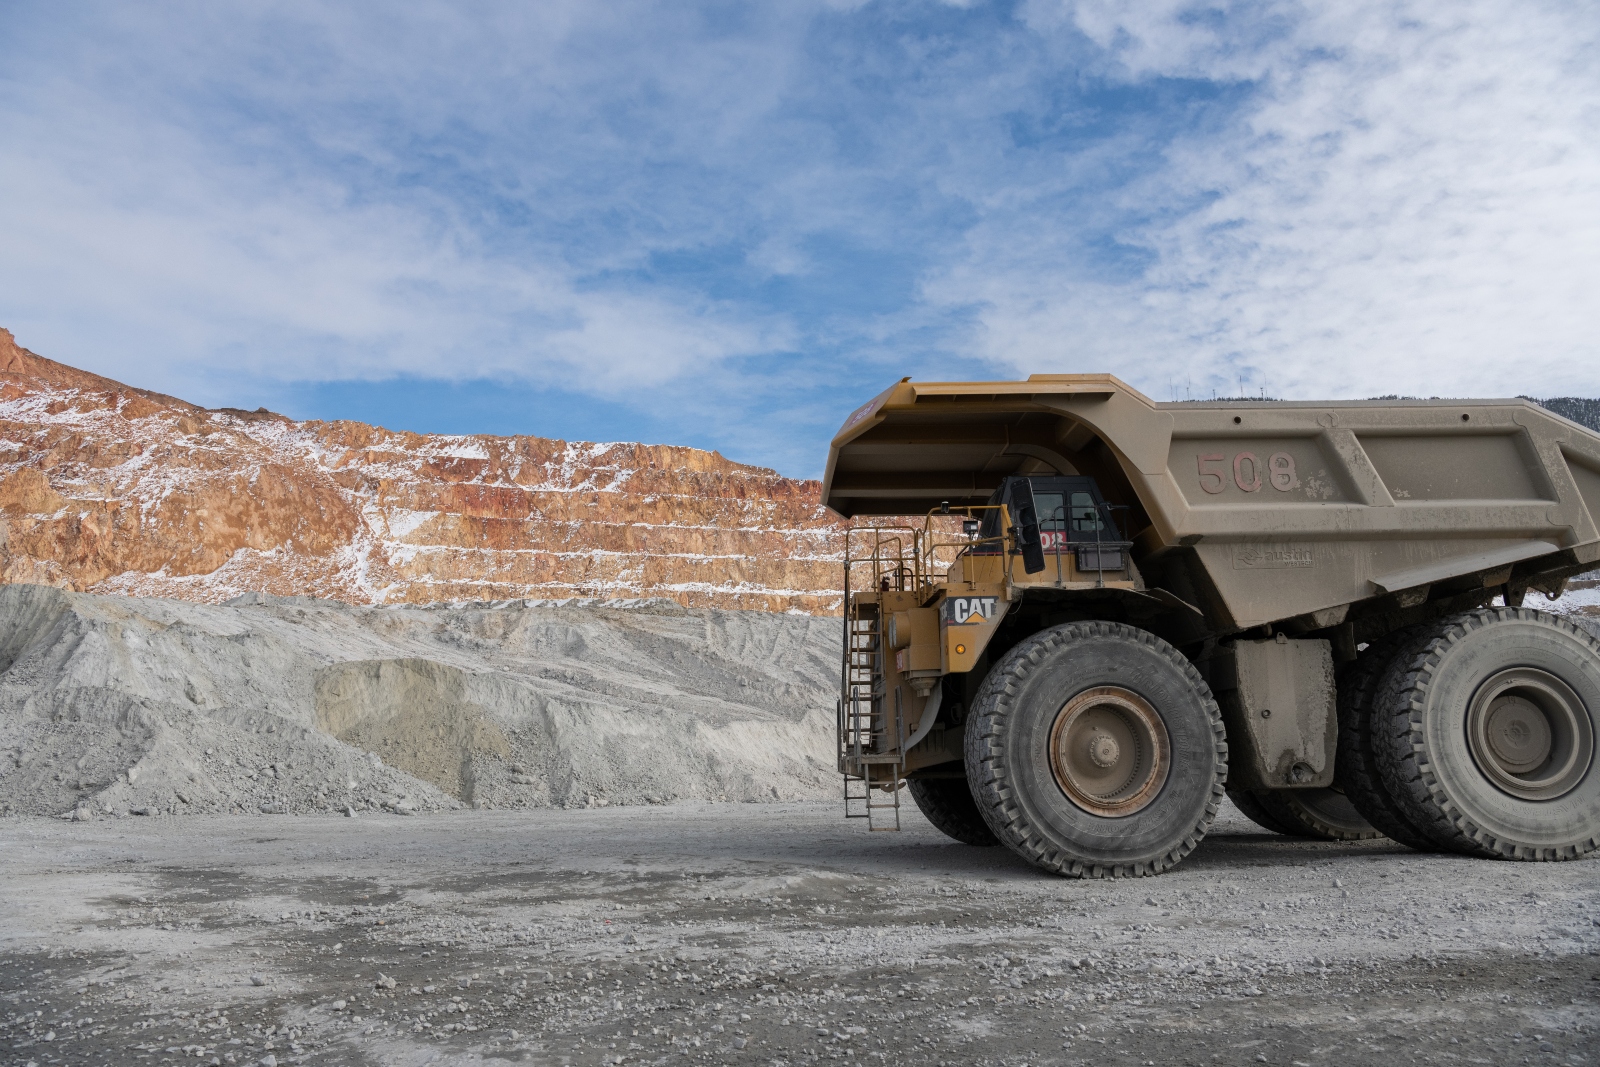 A close-up of a dump truck parked in front of a red and gray mine on the side of a mountain.